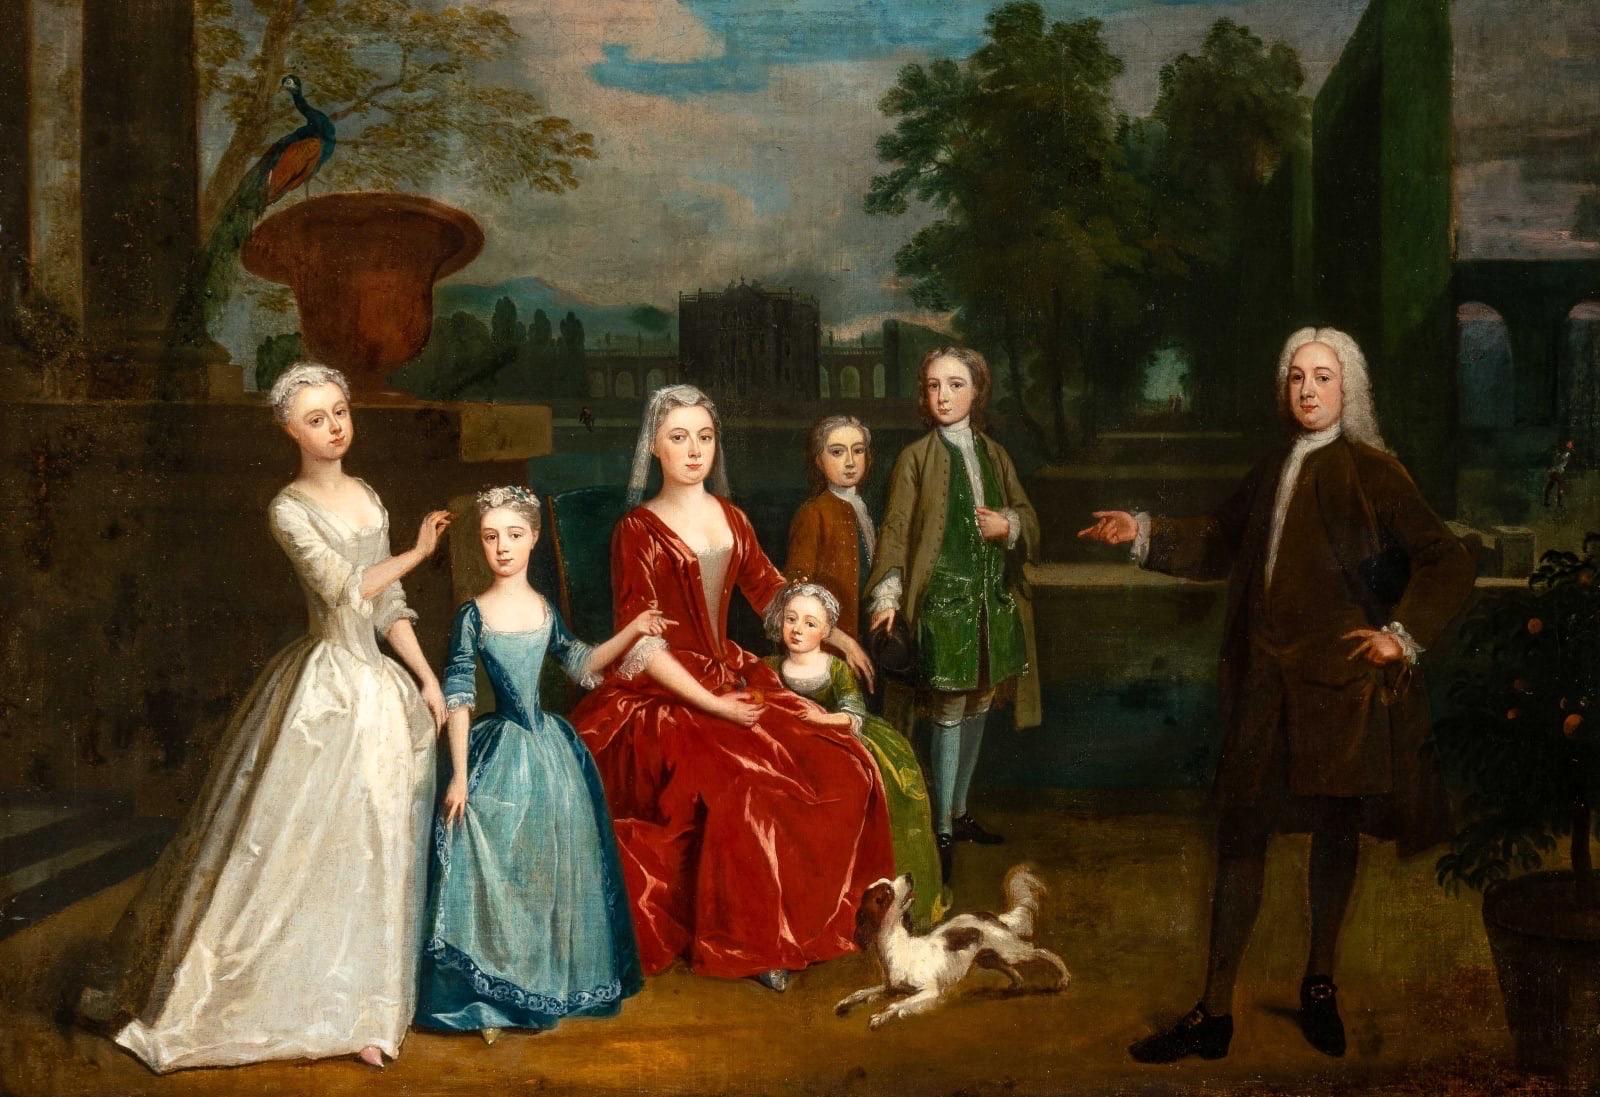 18th century painting of the Dalbiac family in the gardens of a country house - Painting by Charles Philips